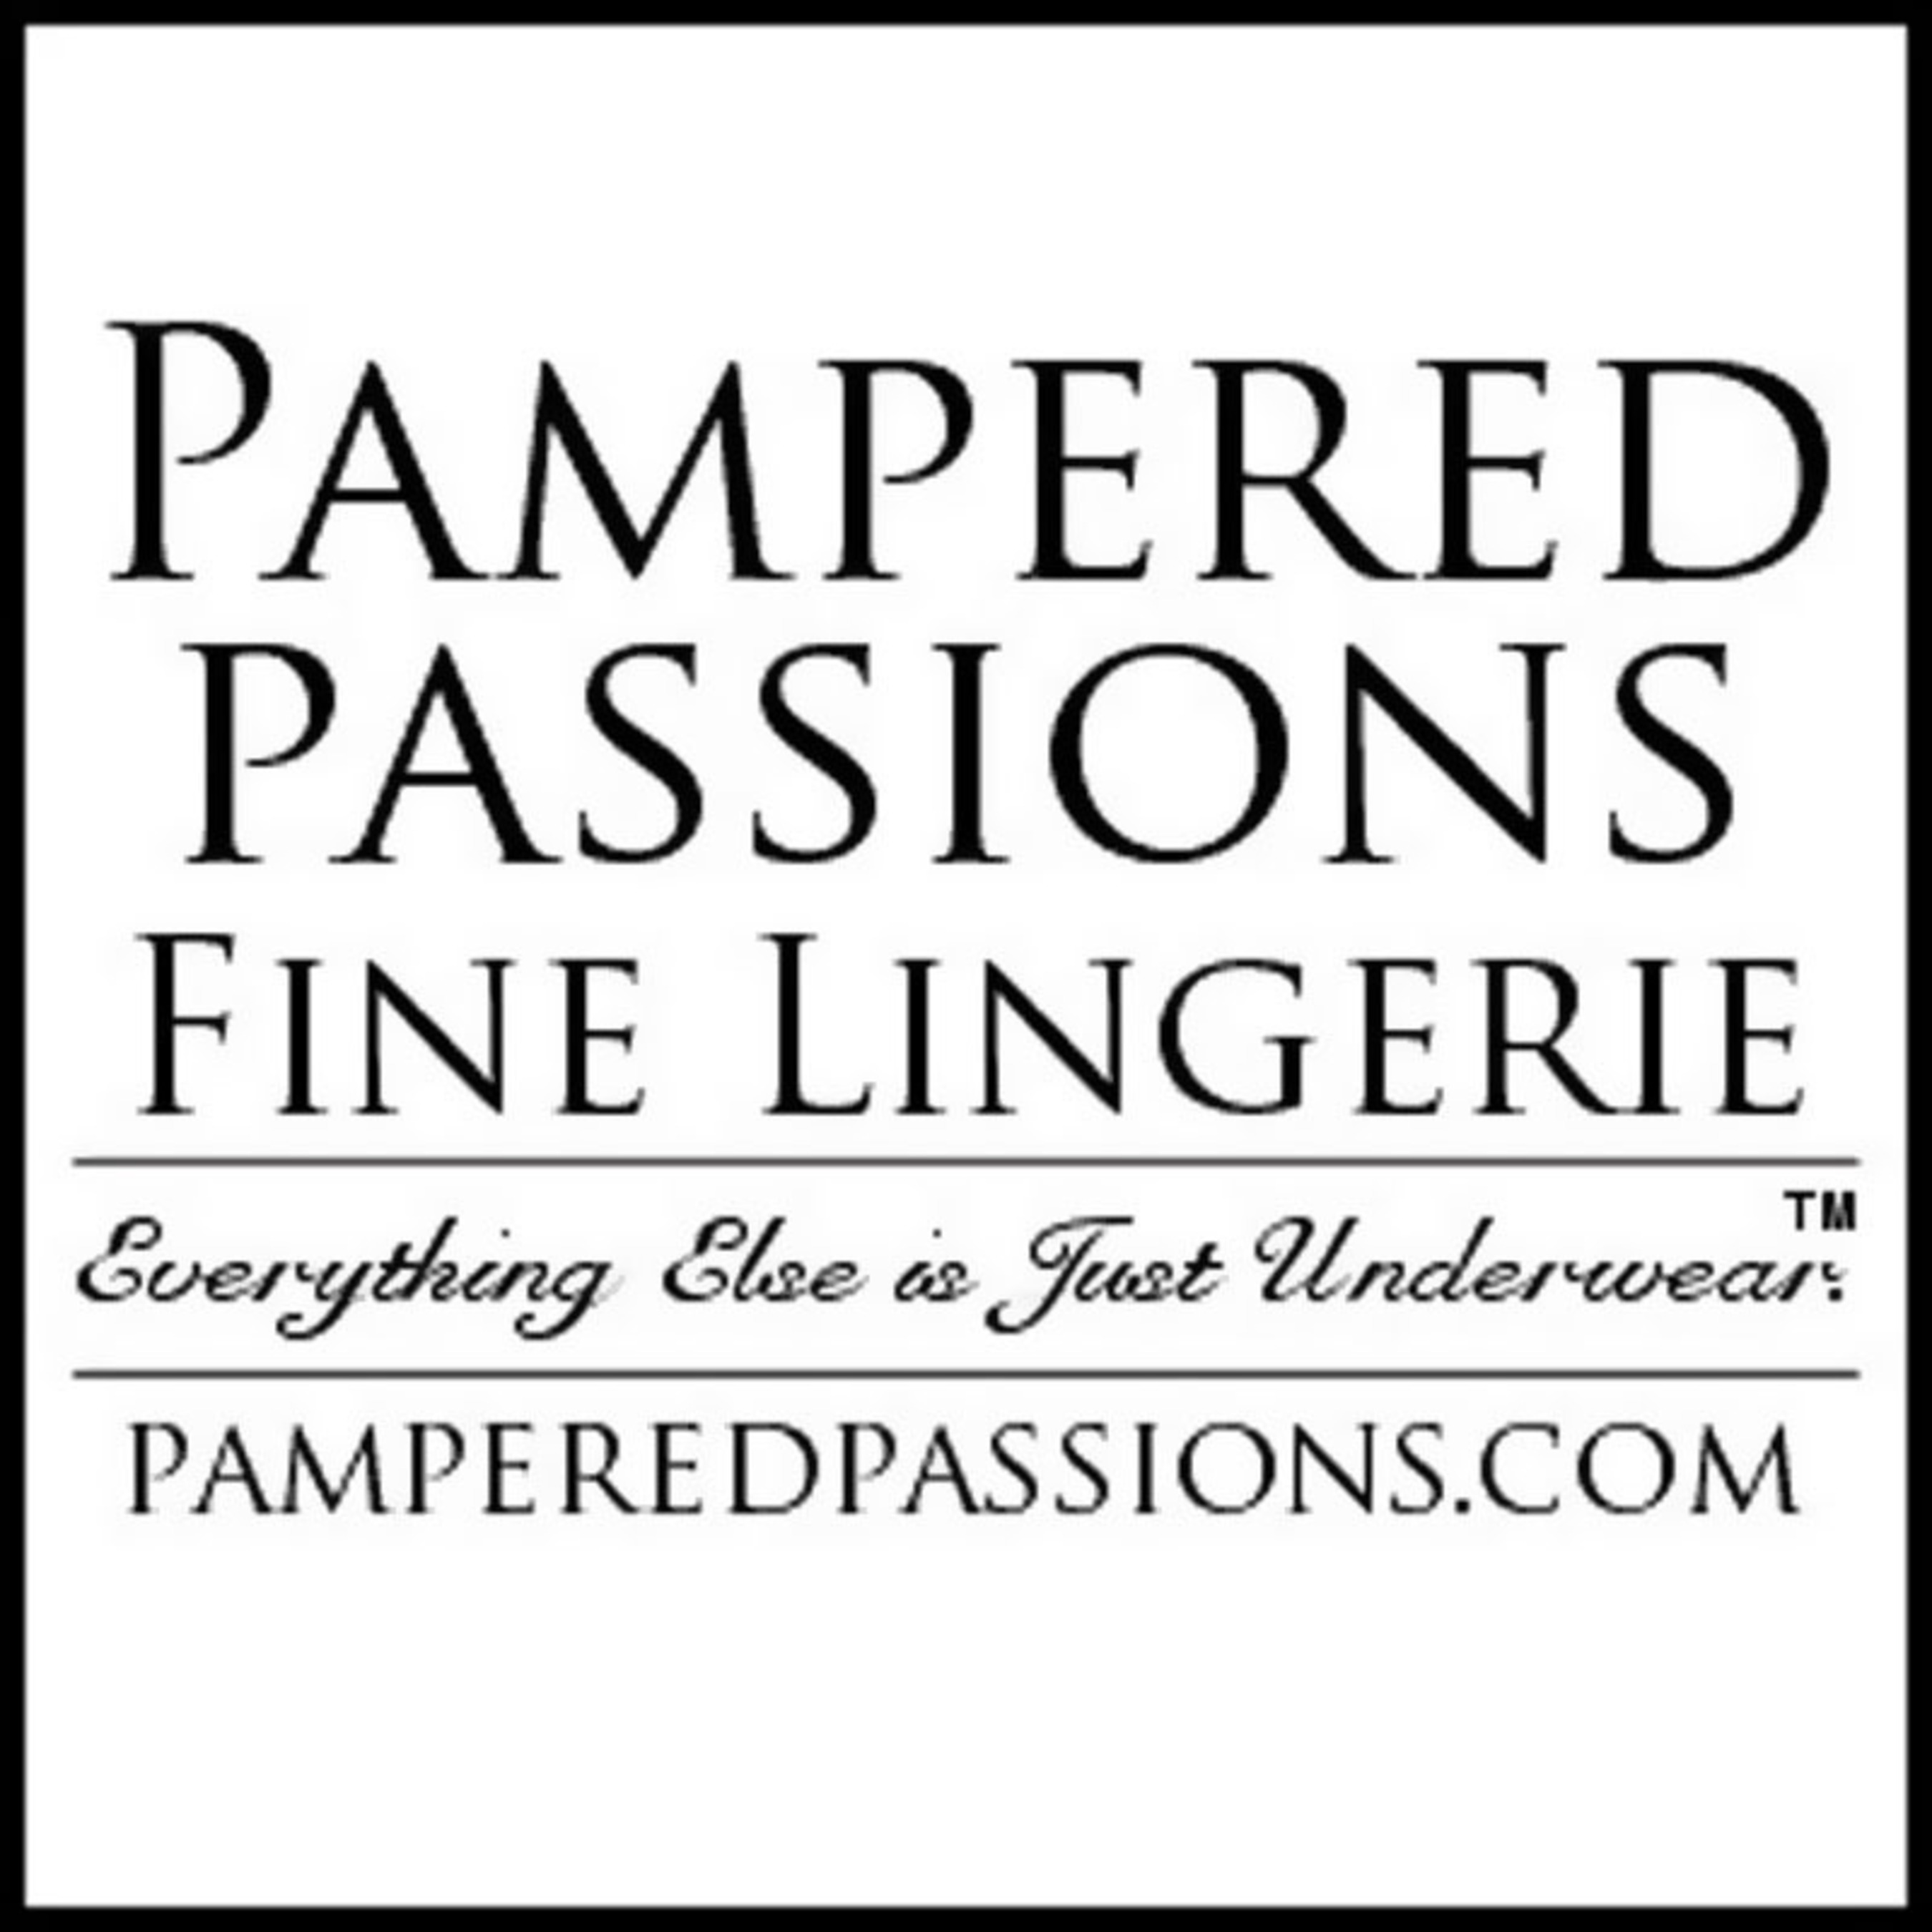 pampered passions